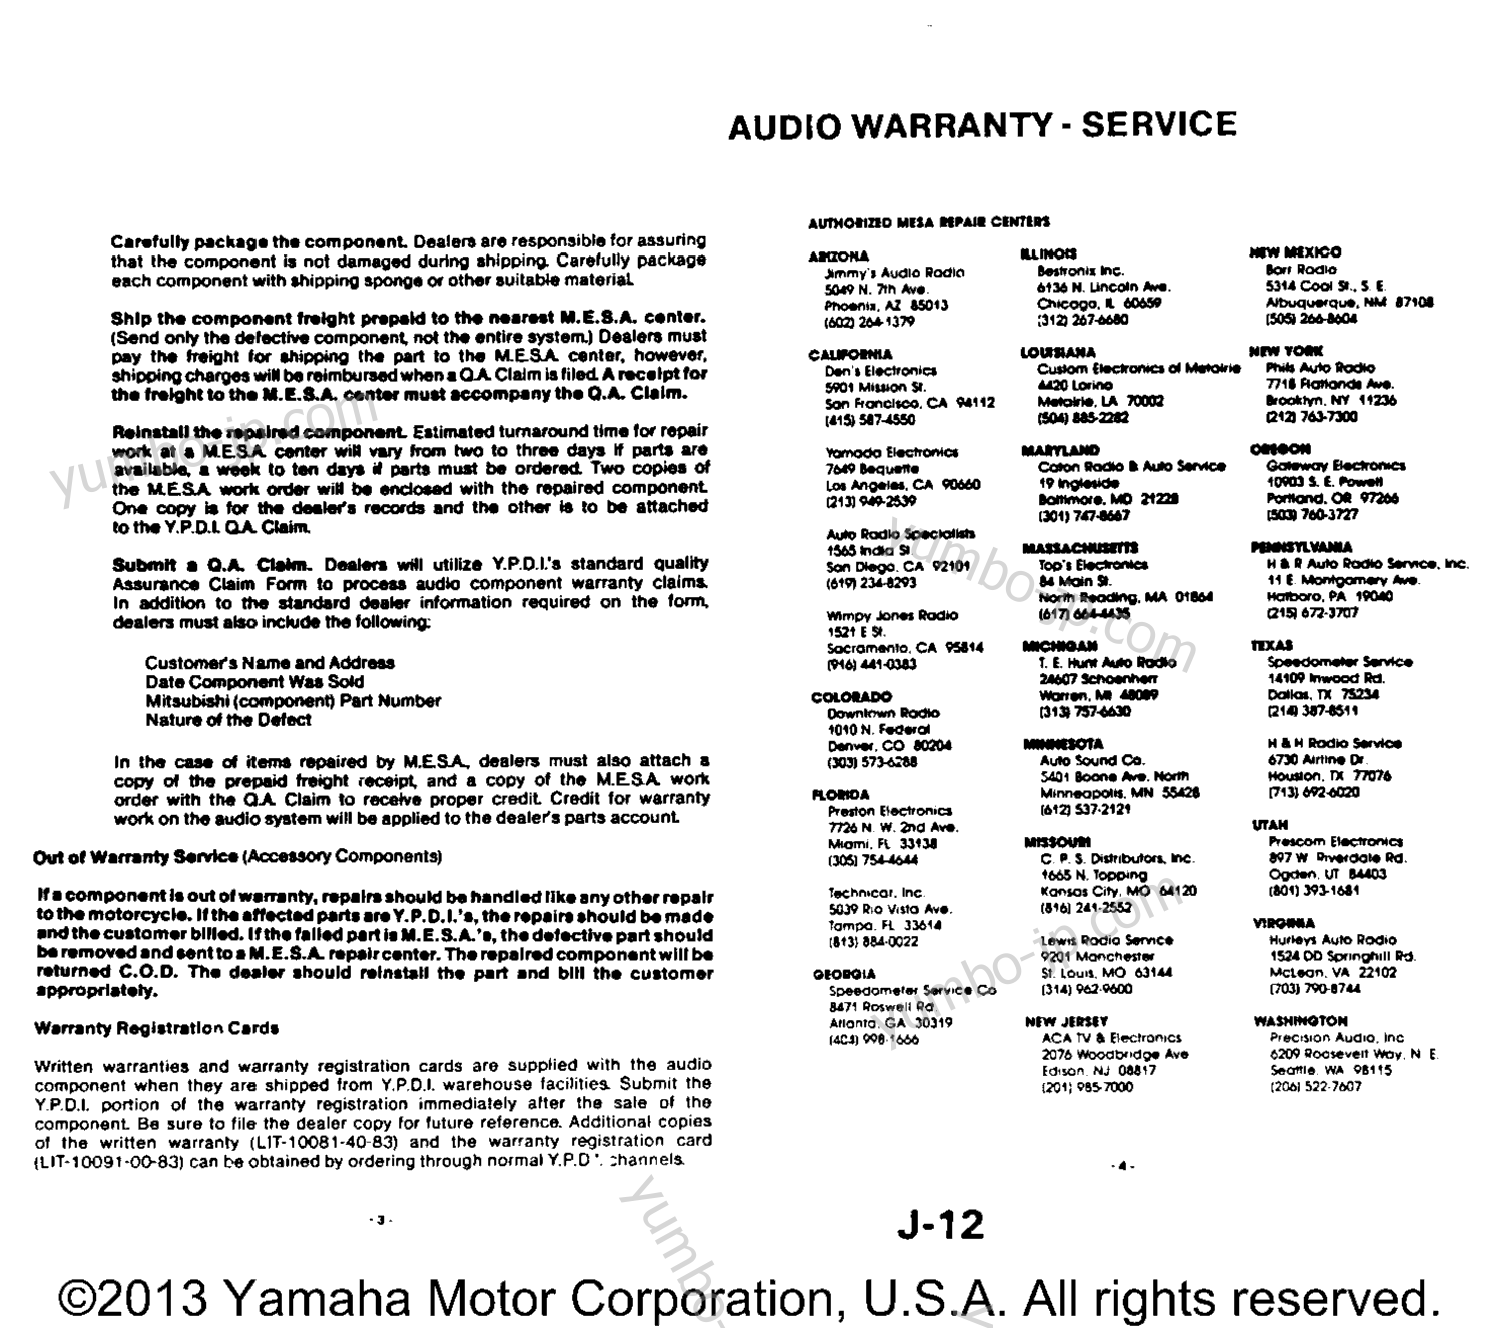 Warranty Information Pg 2 for motorcycles YAMAHA XVZ12DL 1984 year